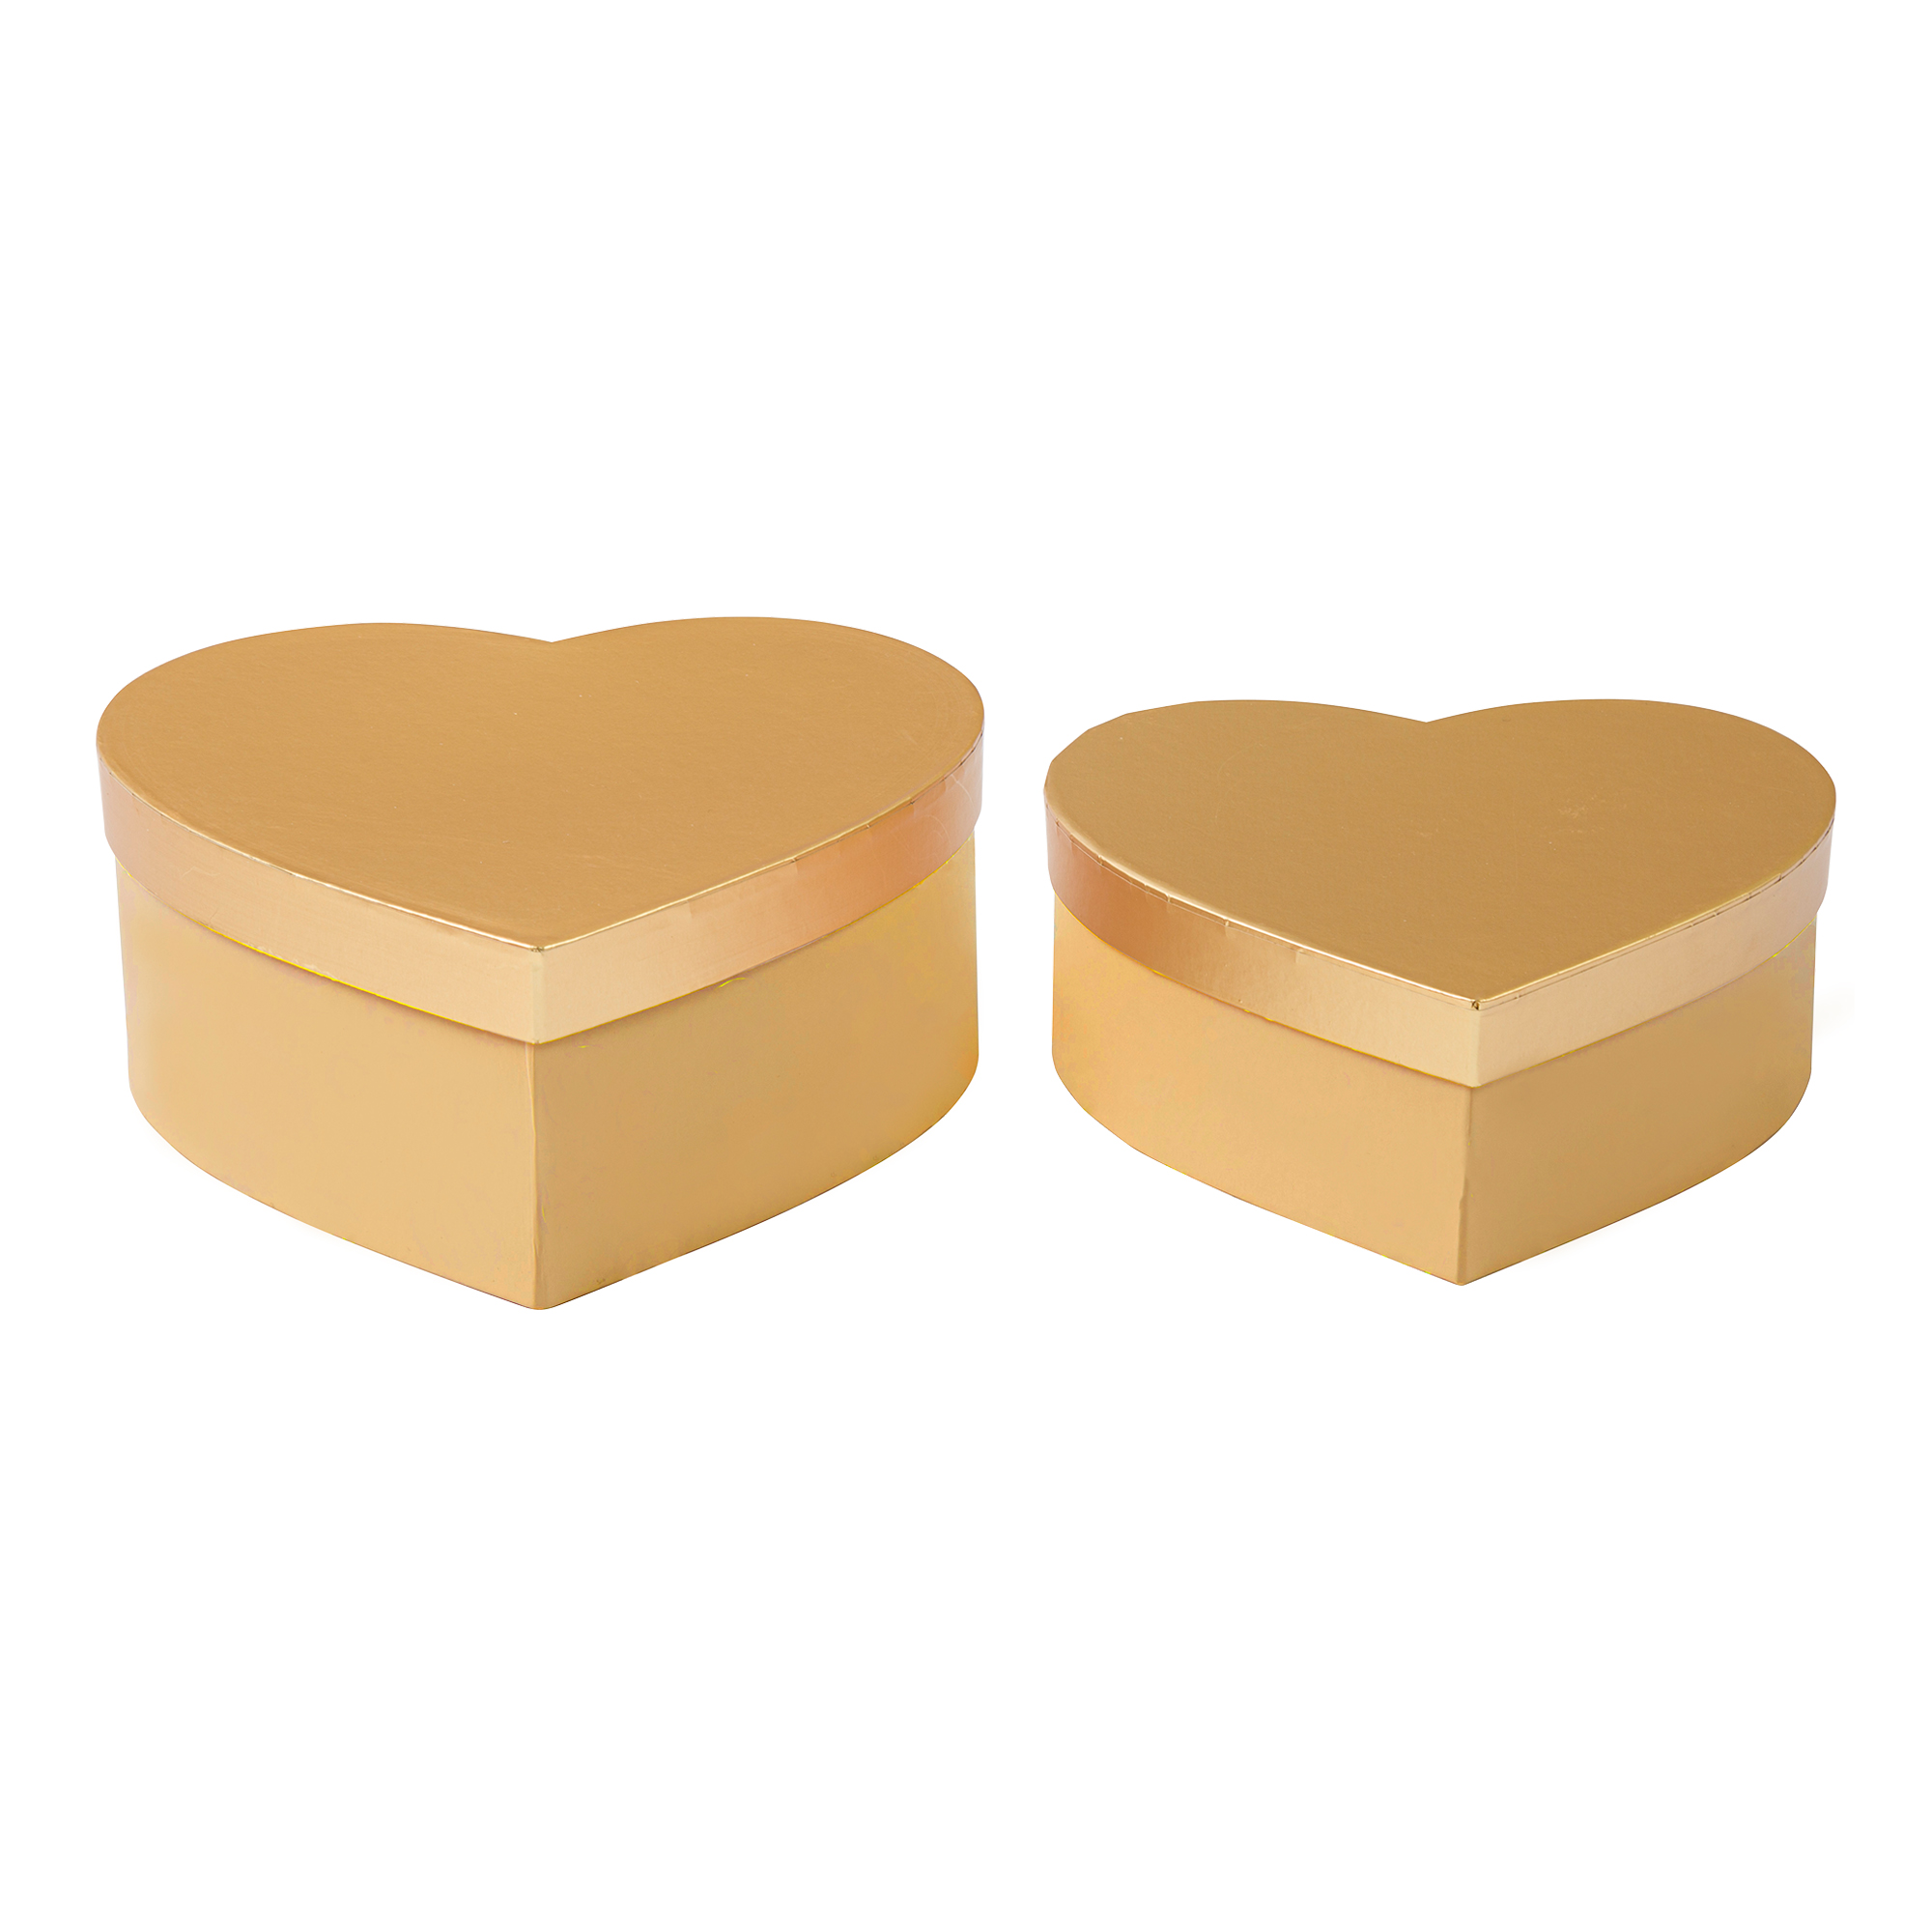 Nested Heart Floral Boxes 2pc/set - All Gold